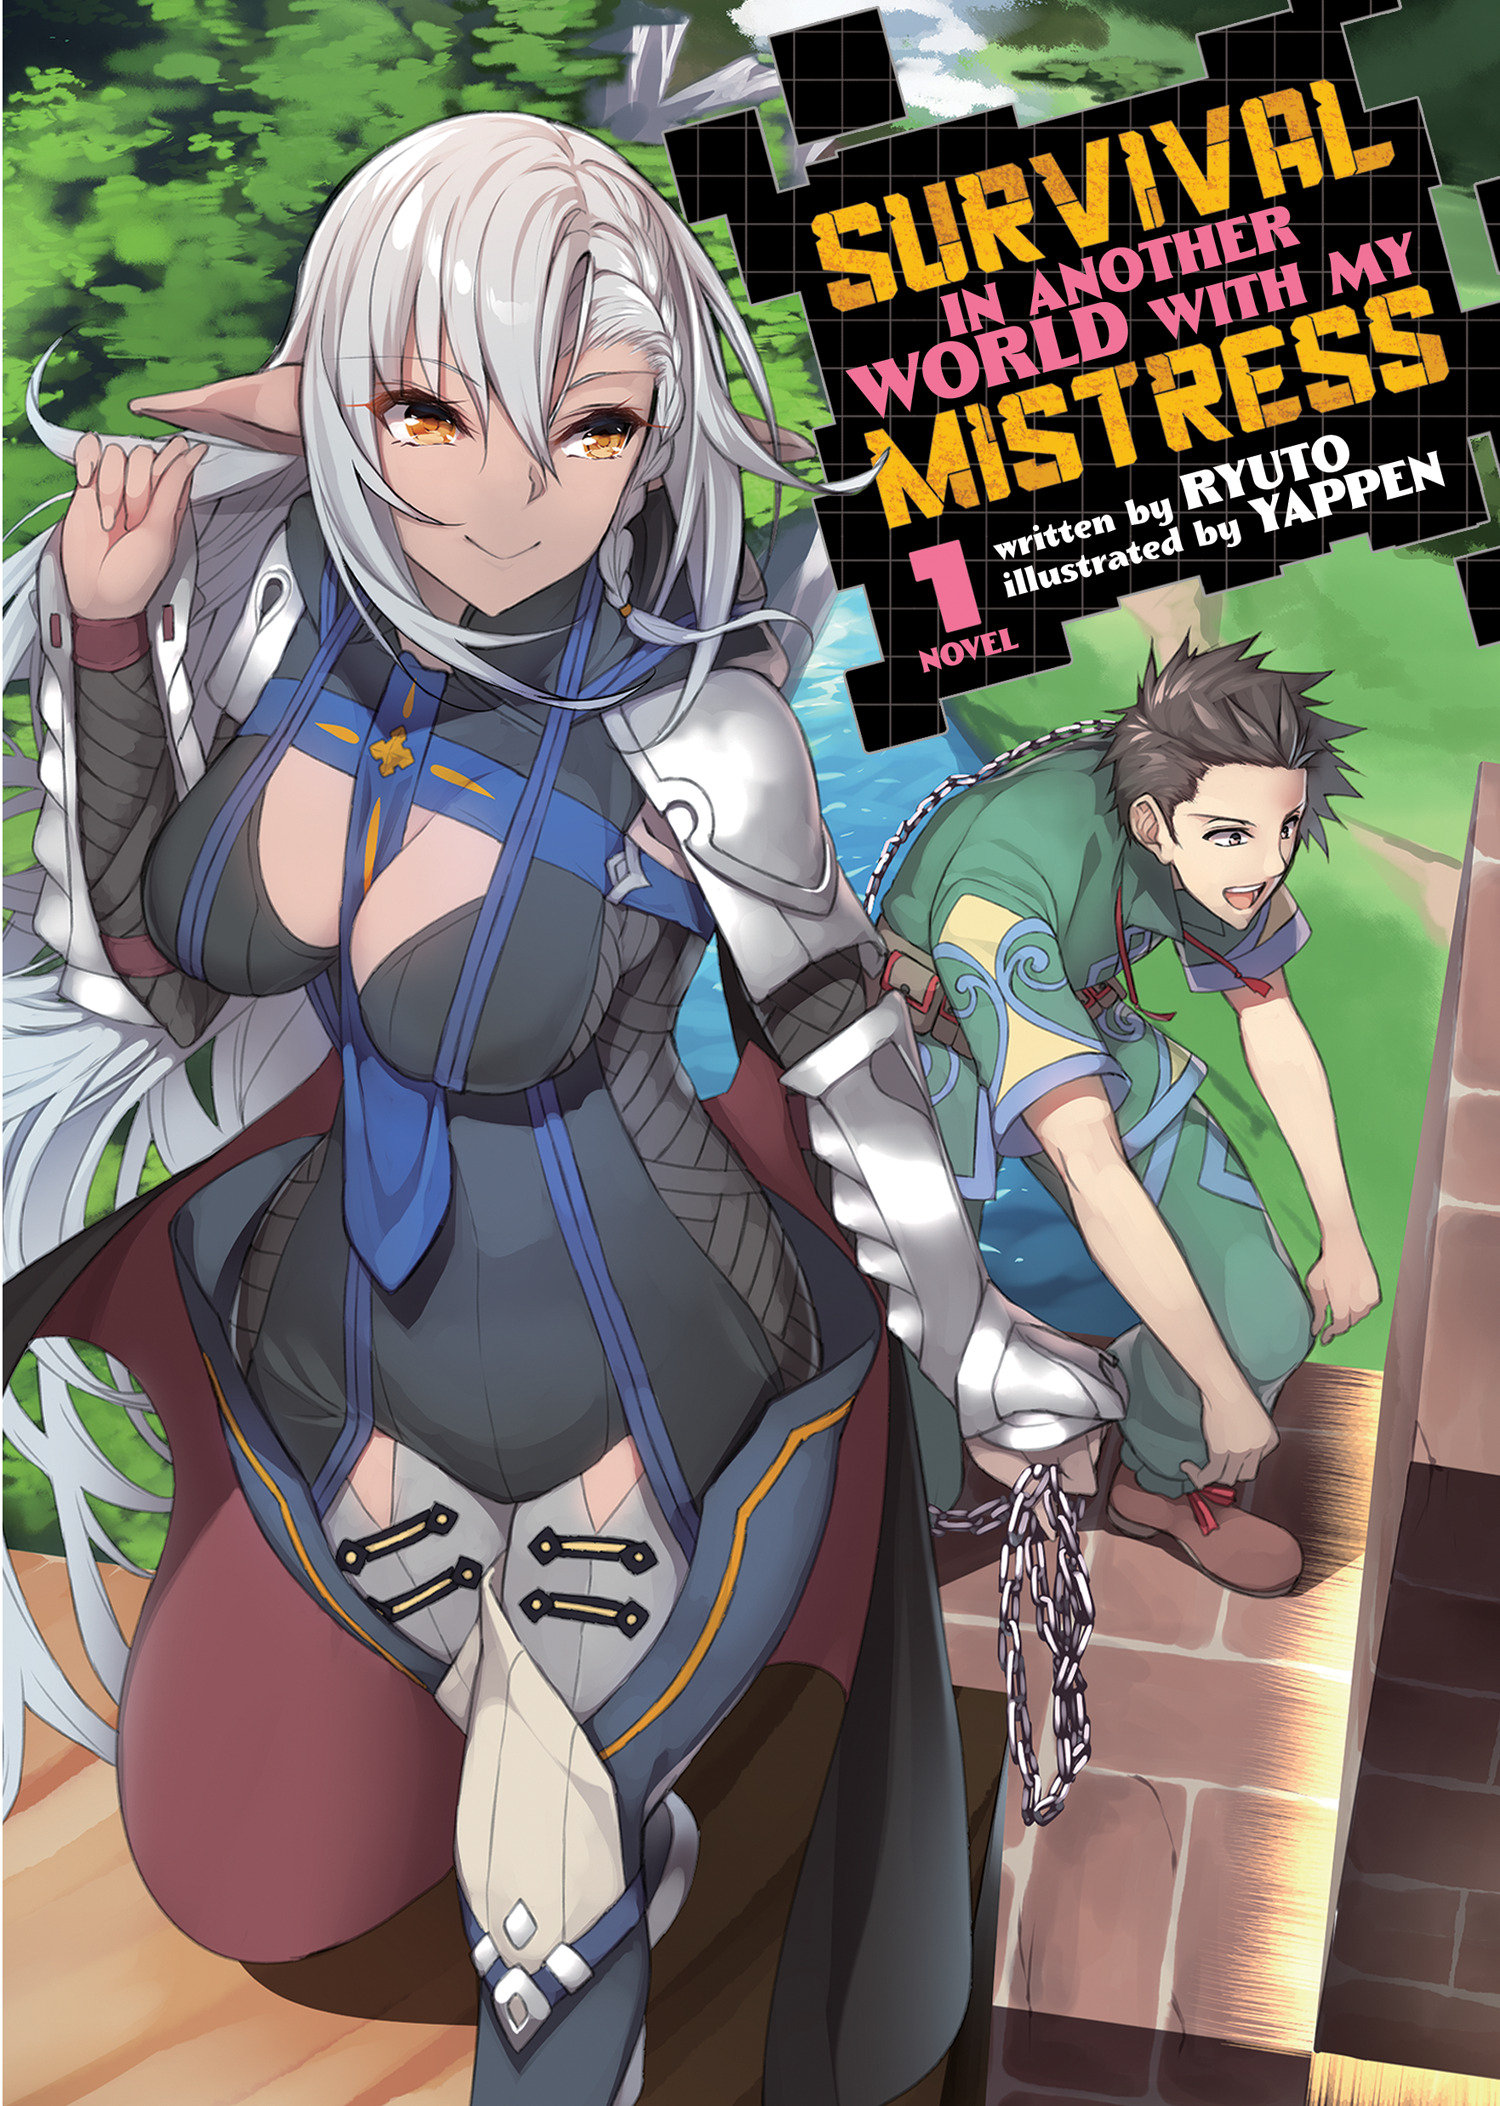 Survival In Another World with My Mistress! Light Novel Volume 1